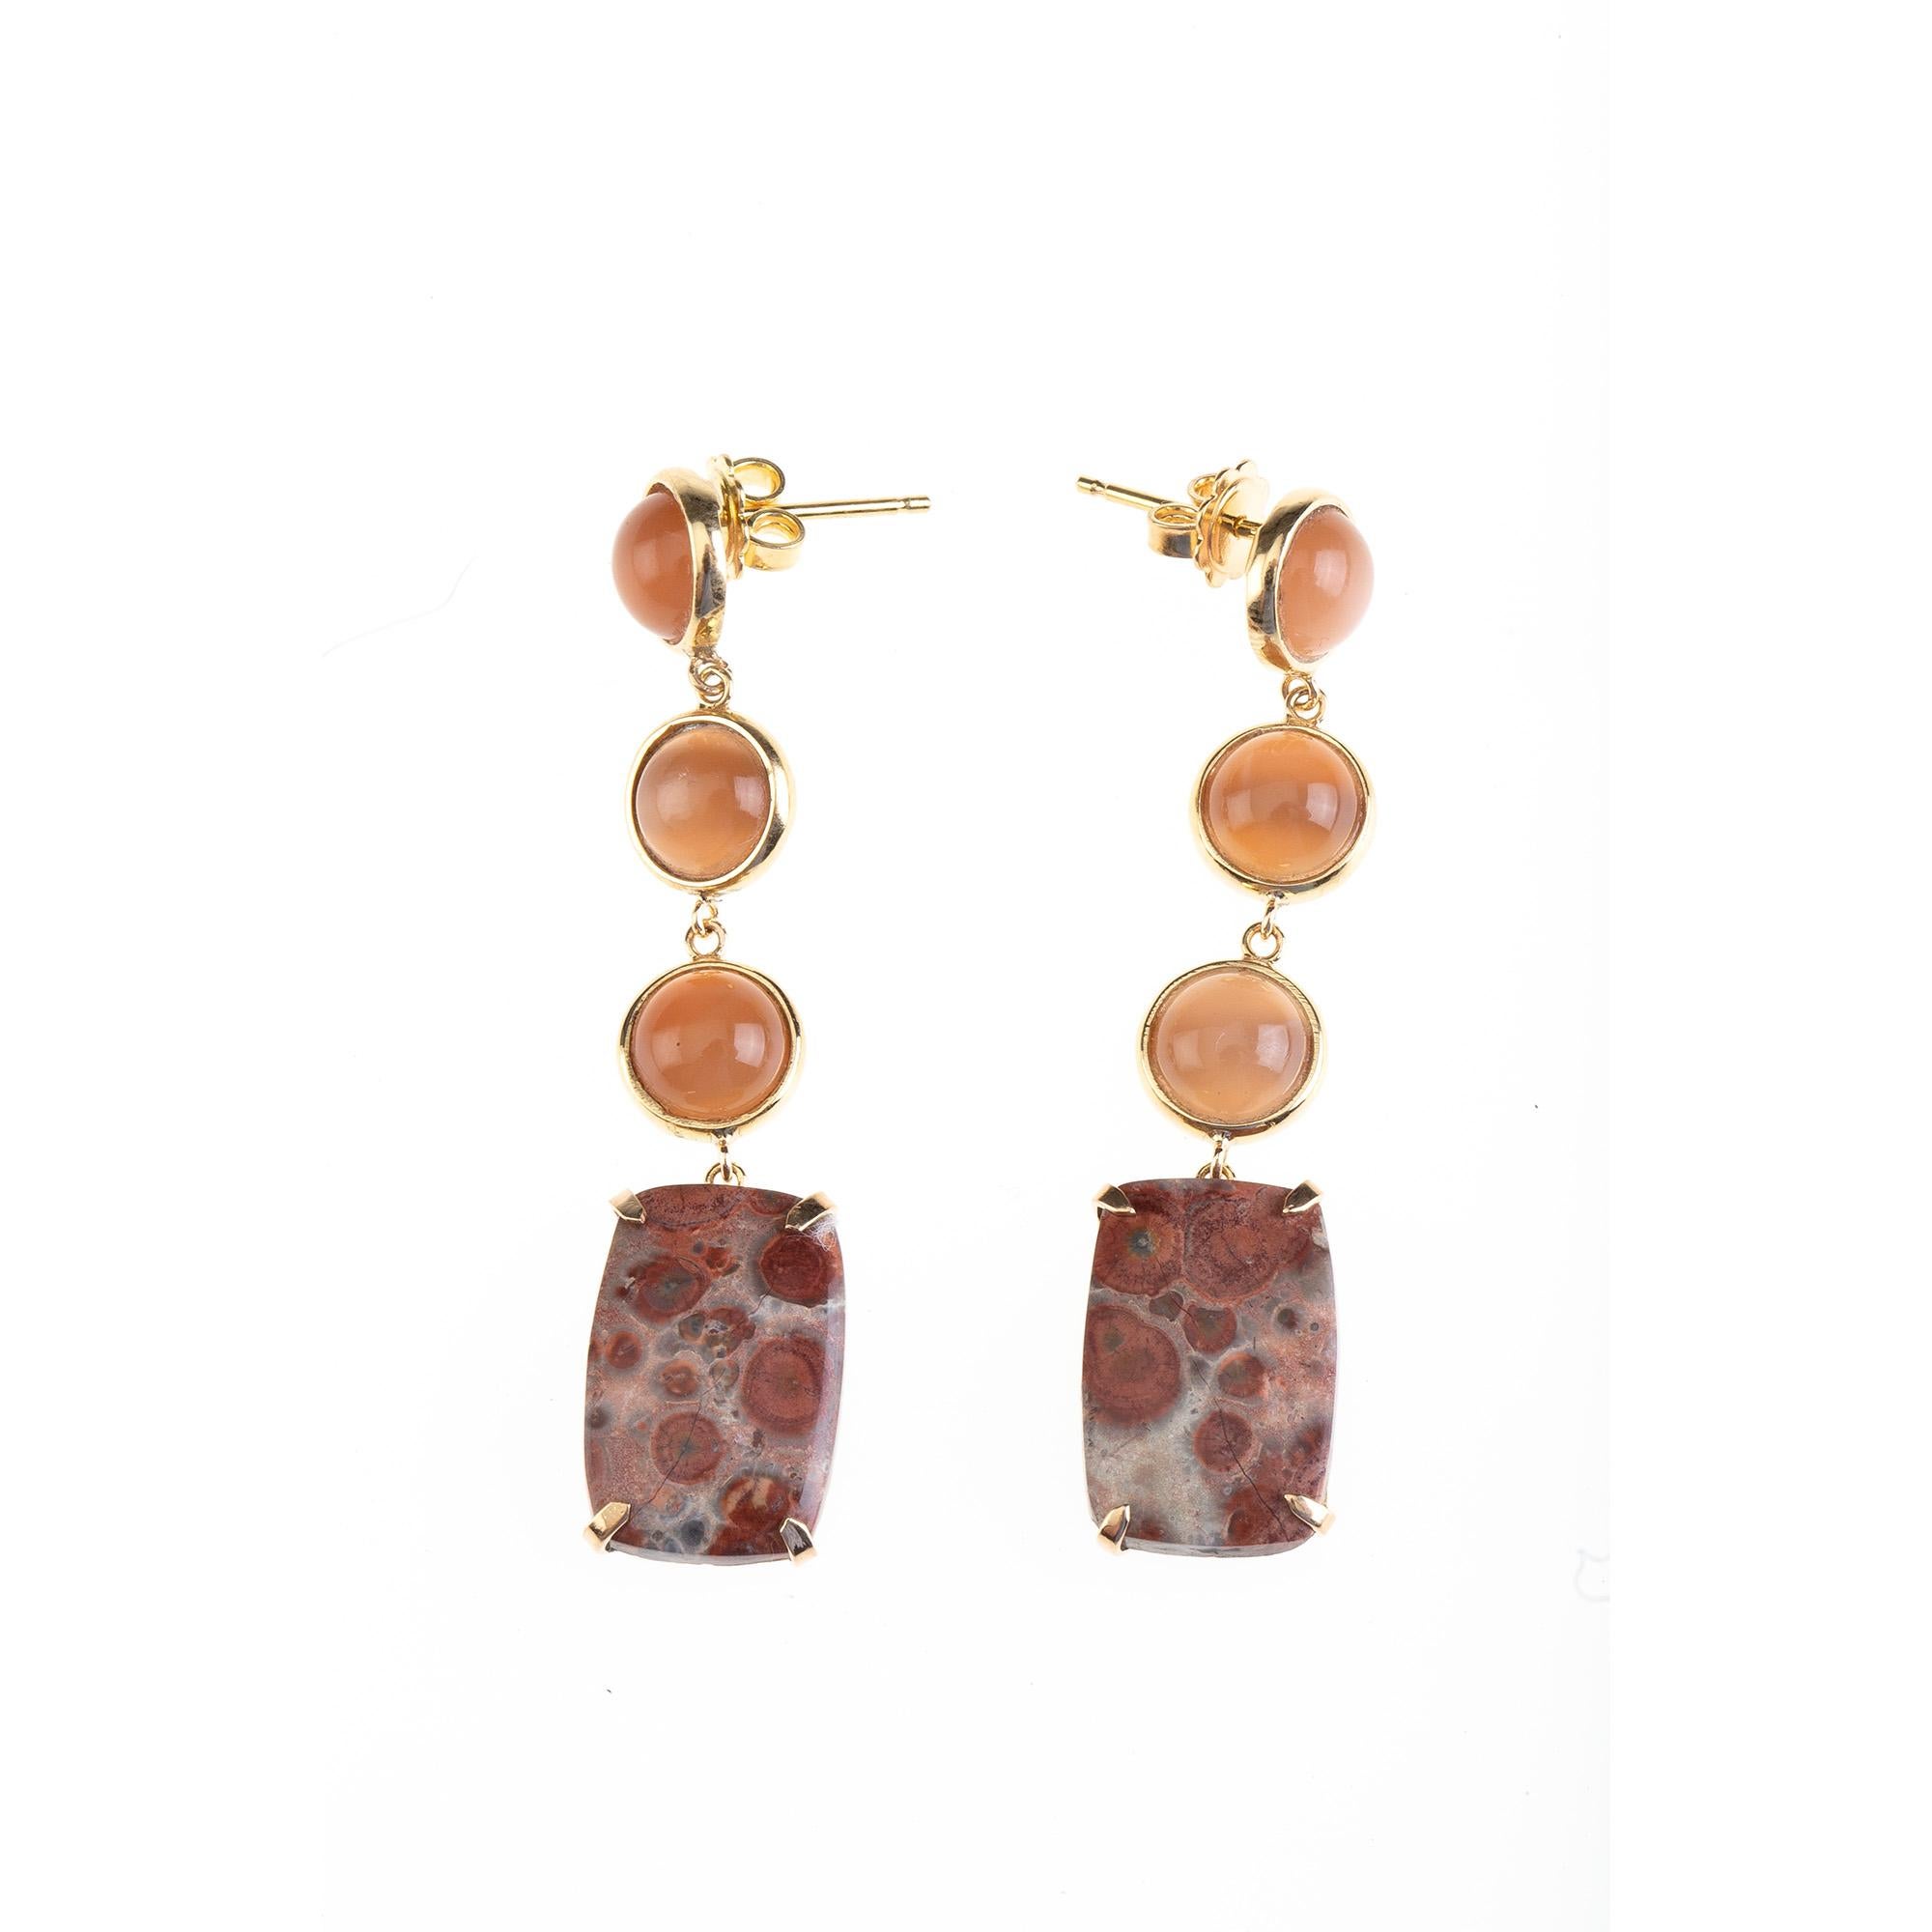 Cabochon fire opal 18 k Gold gr 10,20 Earrings with a Picasso jasper.
All Giulia Colussi jewelry is new and has never been previously owned or worn. Each item will arrive at your door beautifully gift wrapped in our boxes, put inside an elegant